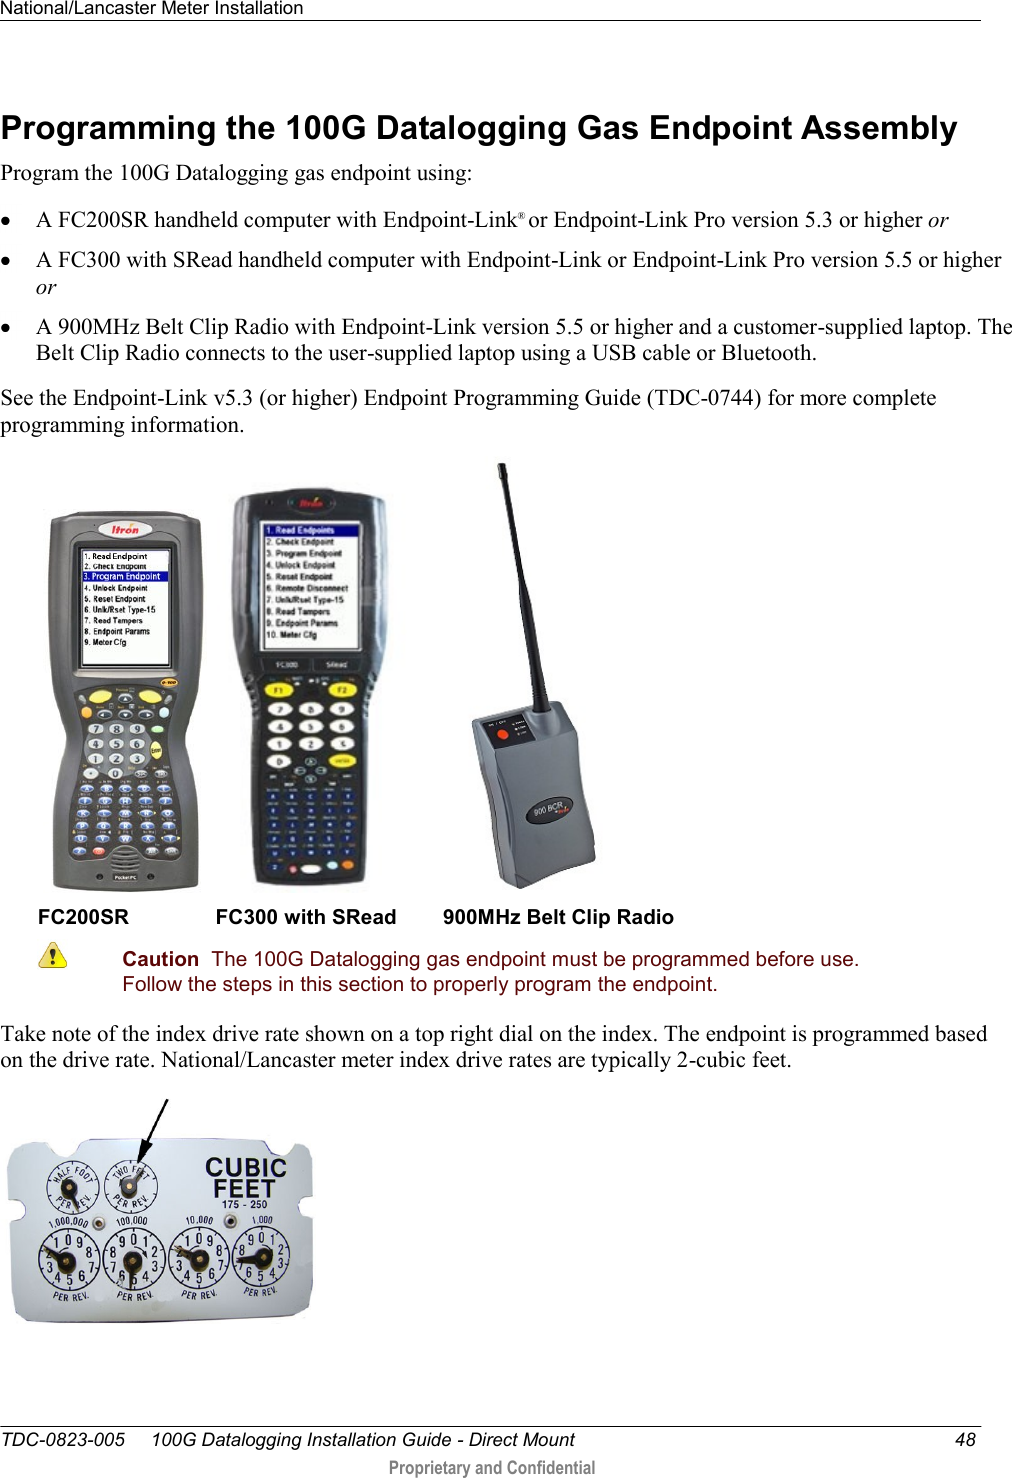 National/Lancaster Meter Installation   TDC-0823-005     100G Datalogging Installation Guide - Direct Mount  48  Proprietary and Confidential    Programming the 100G Datalogging Gas Endpoint Assembly Program the 100G Datalogging gas endpoint using:  A FC200SR handheld computer with Endpoint-Link® or Endpoint-Link Pro version 5.3 or higher or  A FC300 with SRead handheld computer with Endpoint-Link or Endpoint-Link Pro version 5.5 or higher or  A 900MHz Belt Clip Radio with Endpoint-Link version 5.5 or higher and a customer-supplied laptop. The Belt Clip Radio connects to the user-supplied laptop using a USB cable or Bluetooth. See the Endpoint-Link v5.3 (or higher) Endpoint Programming Guide (TDC-0744) for more complete programming information.       FC200SR               FC300 with SRead        900MHz Belt Clip Radio  Caution  The 100G Datalogging gas endpoint must be programmed before use. Follow the steps in this section to properly program the endpoint.  Take note of the index drive rate shown on a top right dial on the index. The endpoint is programmed based on the drive rate. National/Lancaster meter index drive rates are typically 2-cubic feet.    